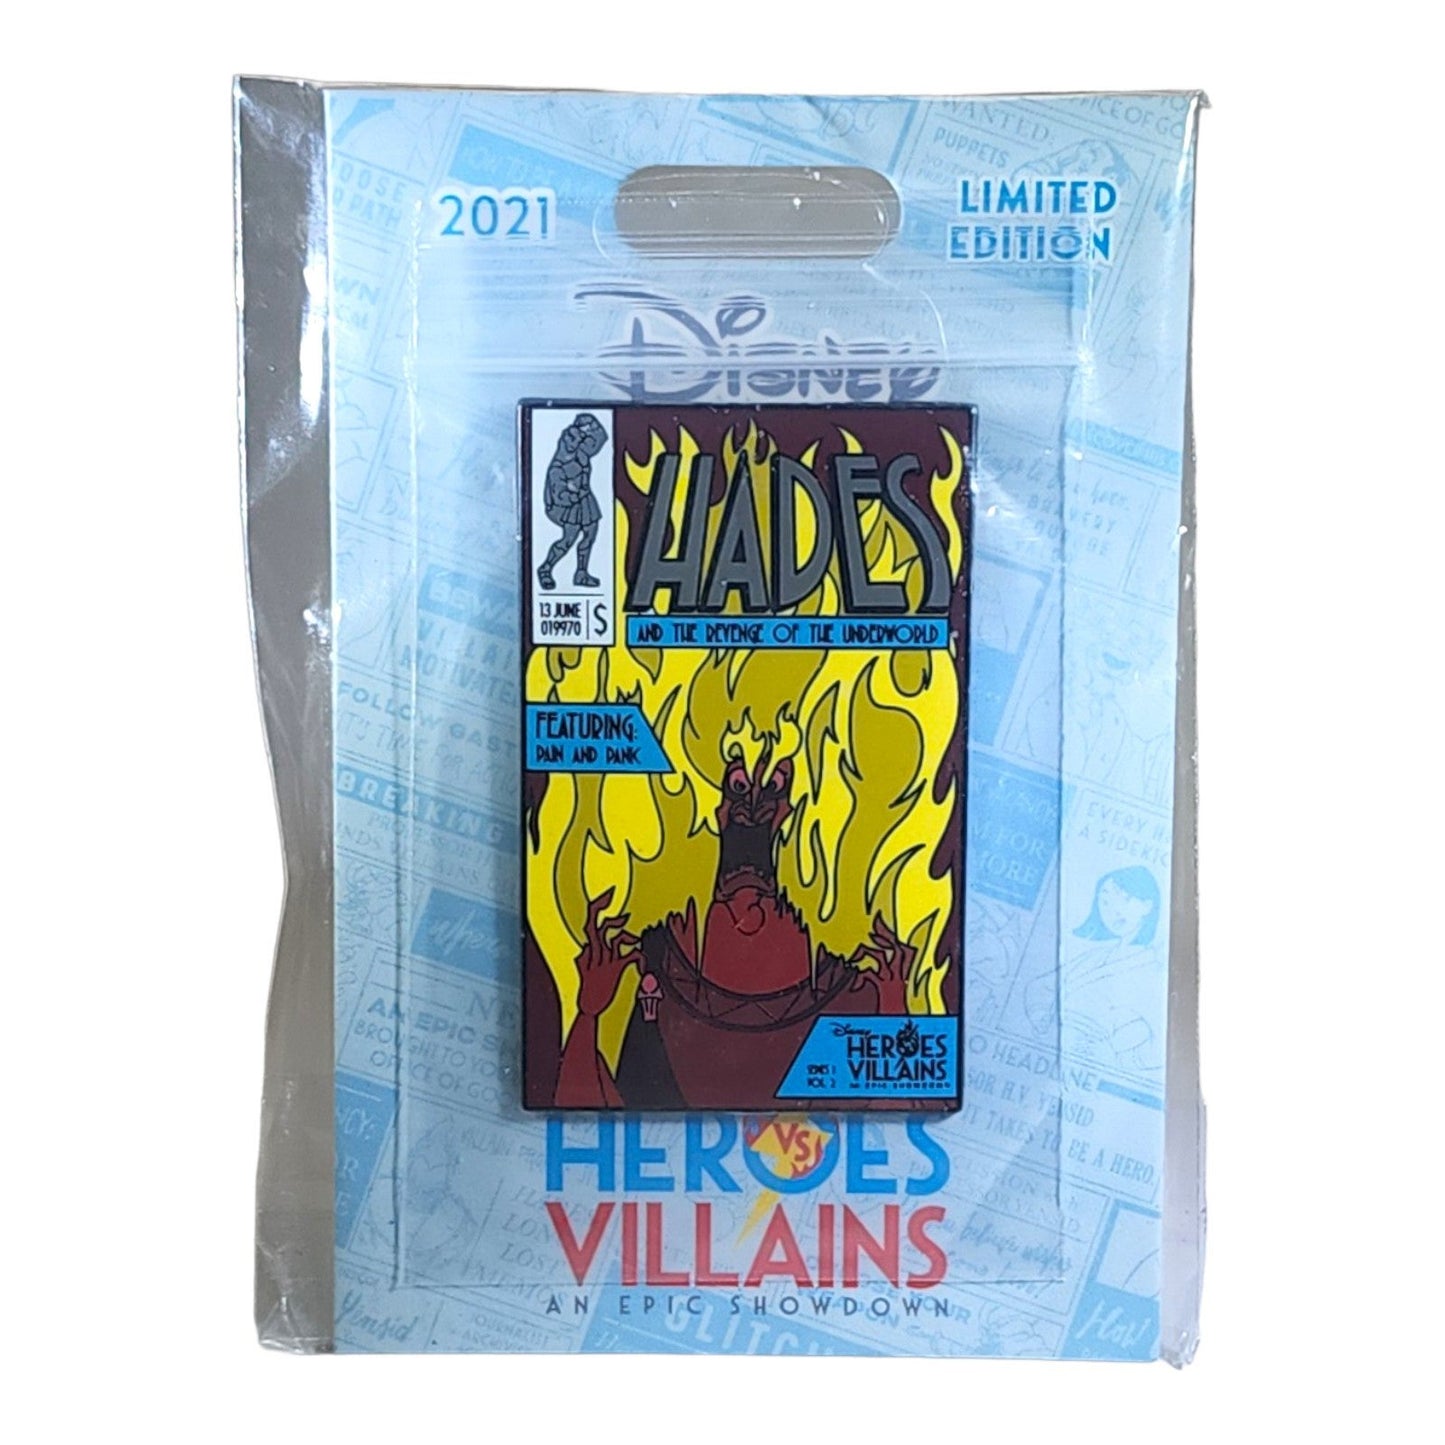 Hades from Hercules Comic Book Cover Series  - Heroes vs Villains Pin Event  - Limited Edition  750